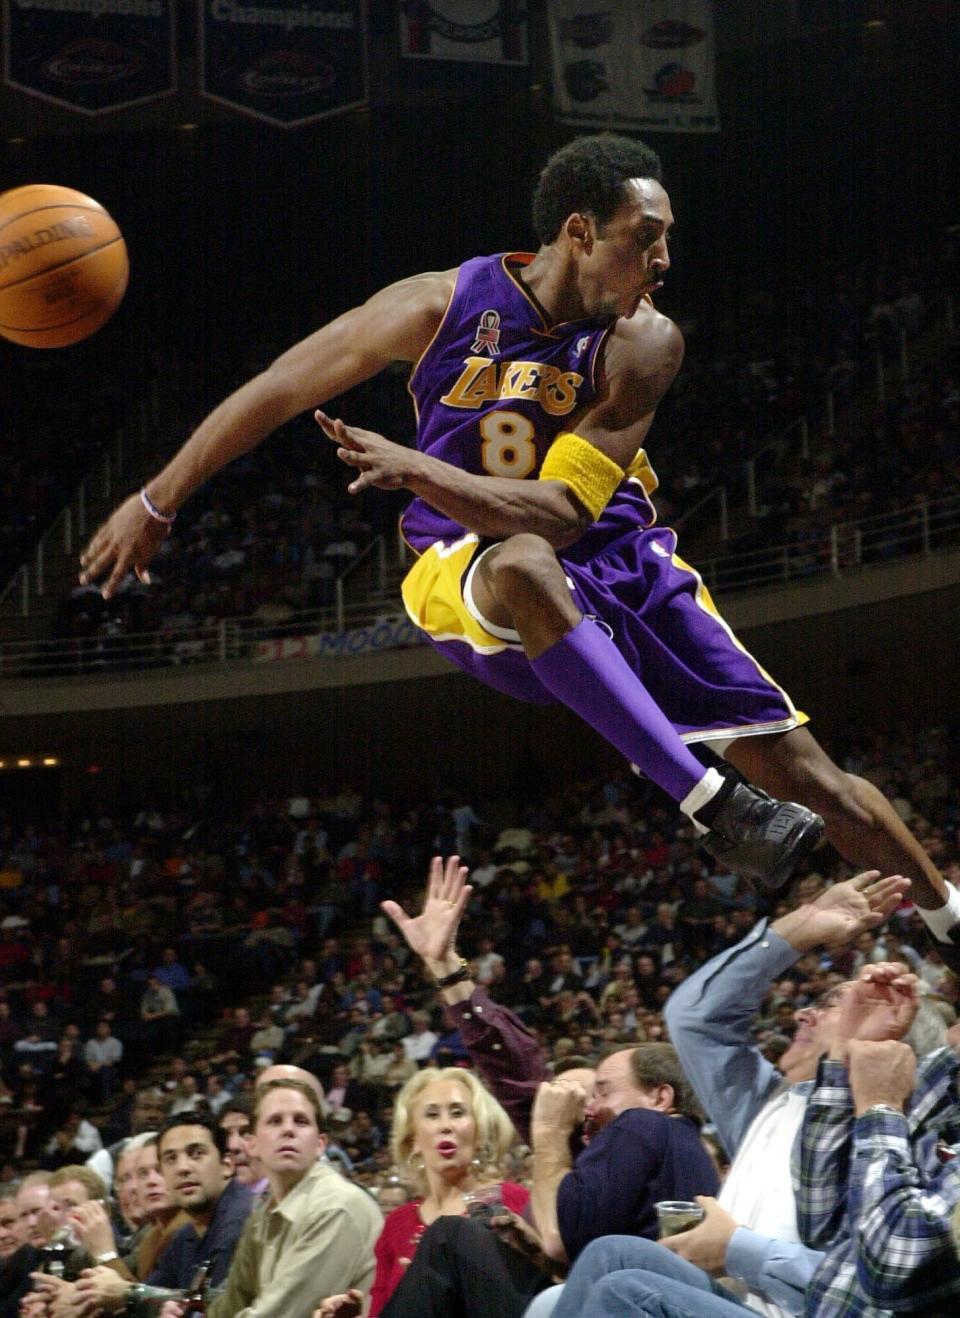 Los Angeles Lakers' Kobe Bryant jumps over a row of fans after saving the ball from going out of bounds in the second half of the Lakers 107-101 win over the Houston Rockets in Houston, Dec. 20, 2001. Bryant, a five-time NBA champion and a two-time Olympic gold medalist, died in a helicopter crash in California on Sunday, Jan. 26, 2020. (AP Photo/Pat Sullivan)